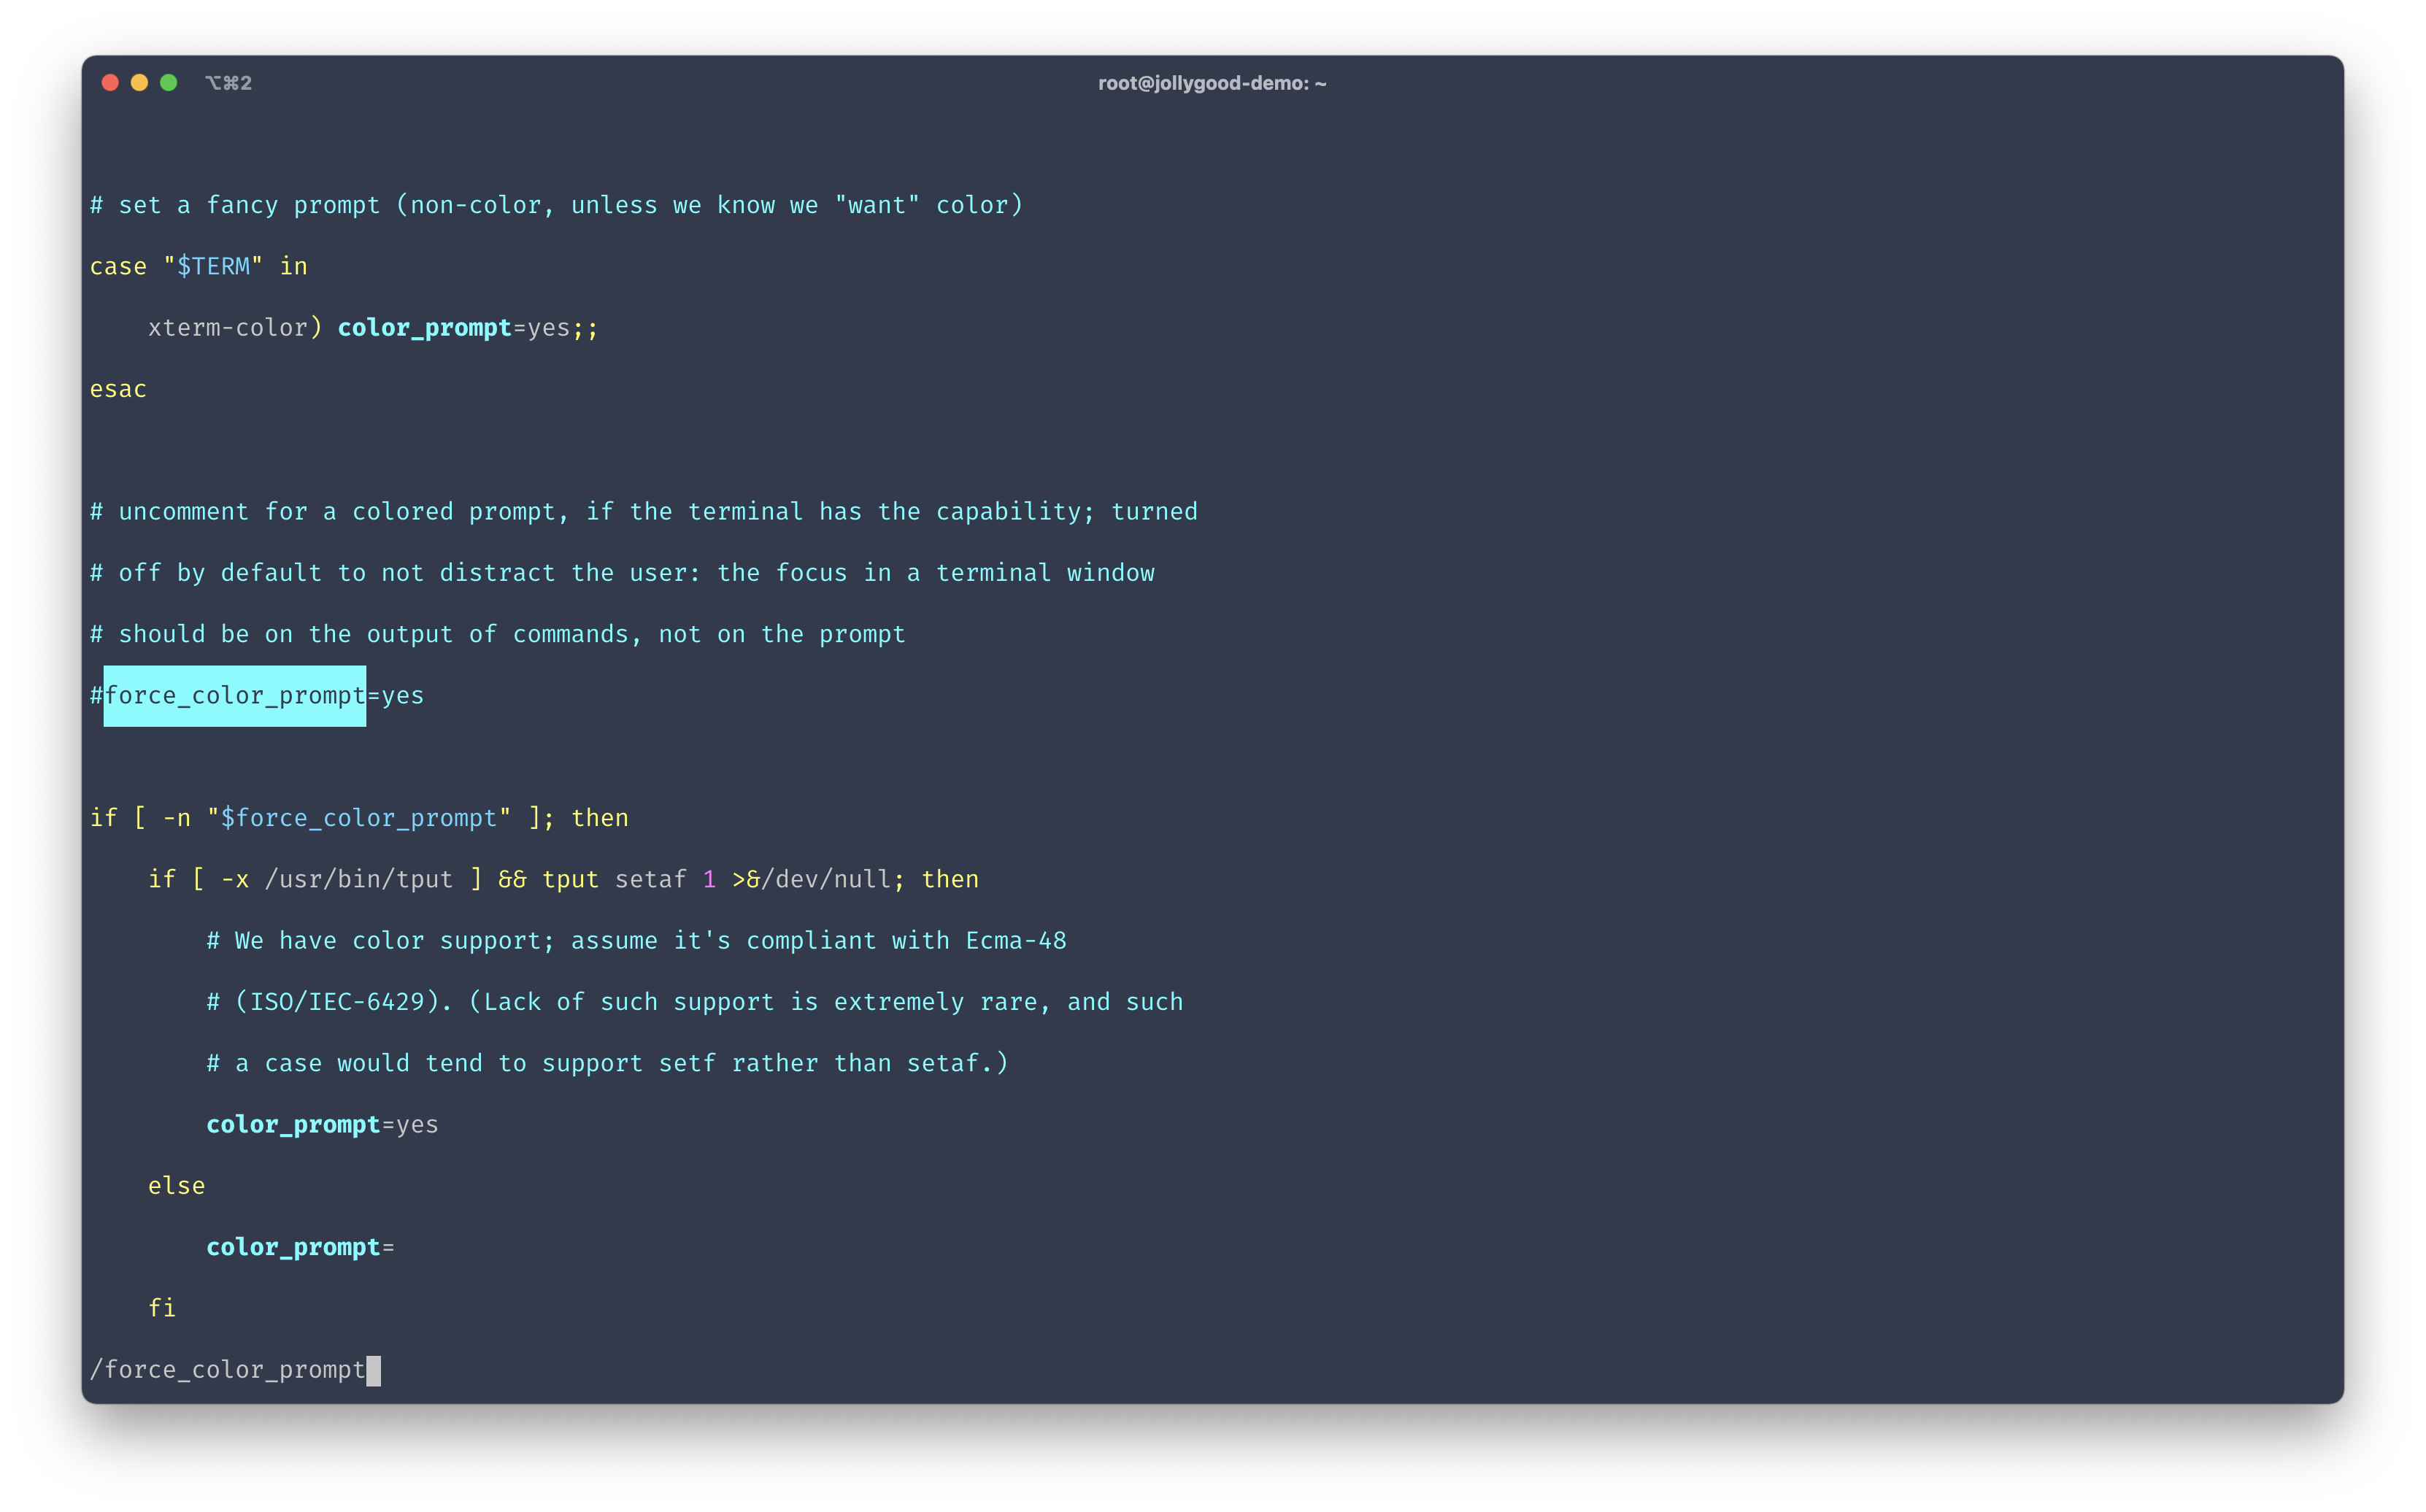 Screenshot of the vim editor in the terminal uncommenting the force_color_prompt=yes line.